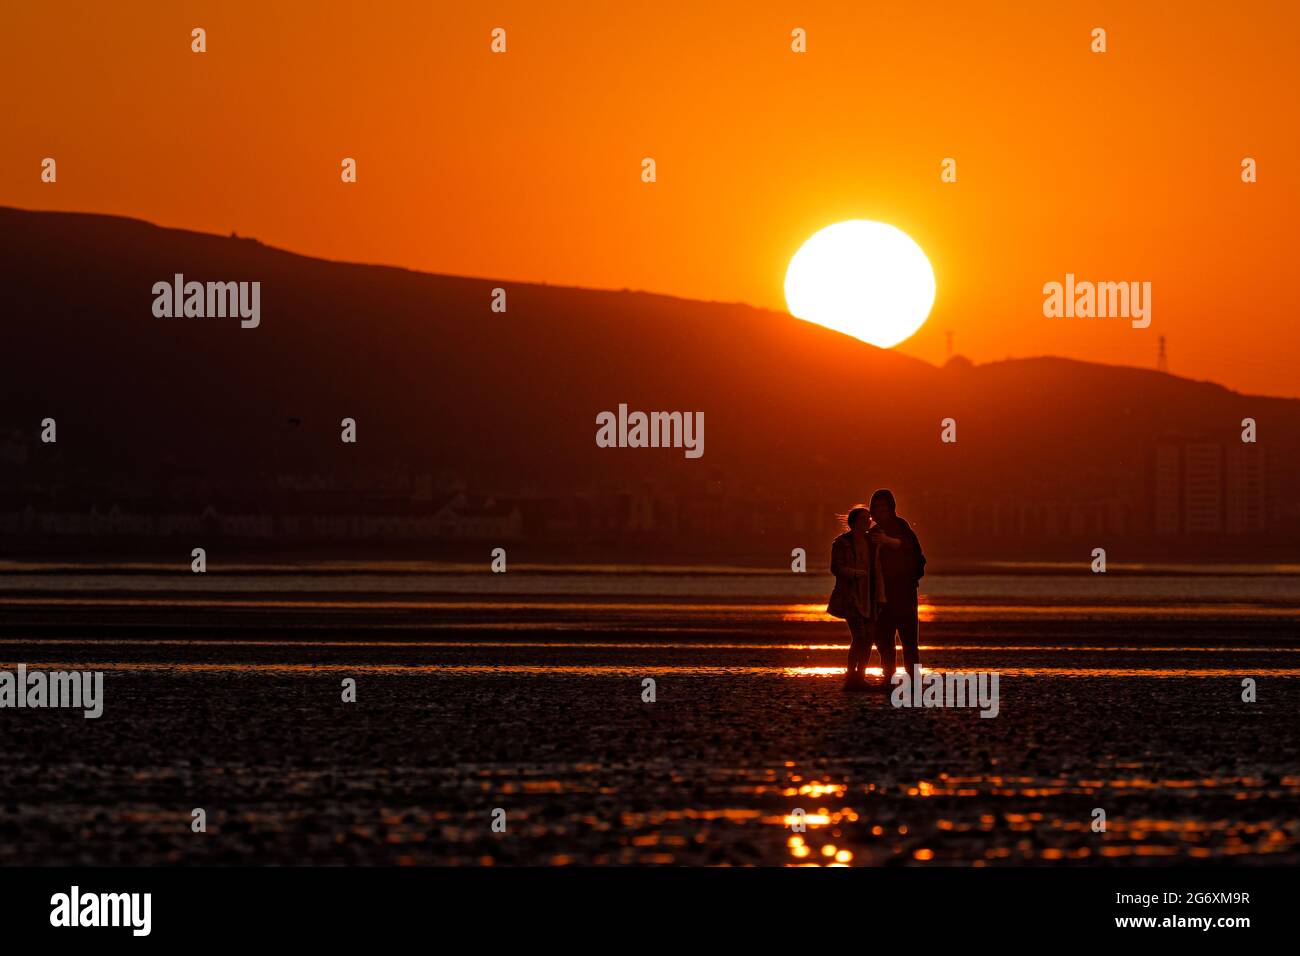 A young couple take a selfie on the beach as the sun rises, marking the beginning of the meteorological summer, Swansea Bay, Wales, UK. Tuesday 01 Jun Stock Photo